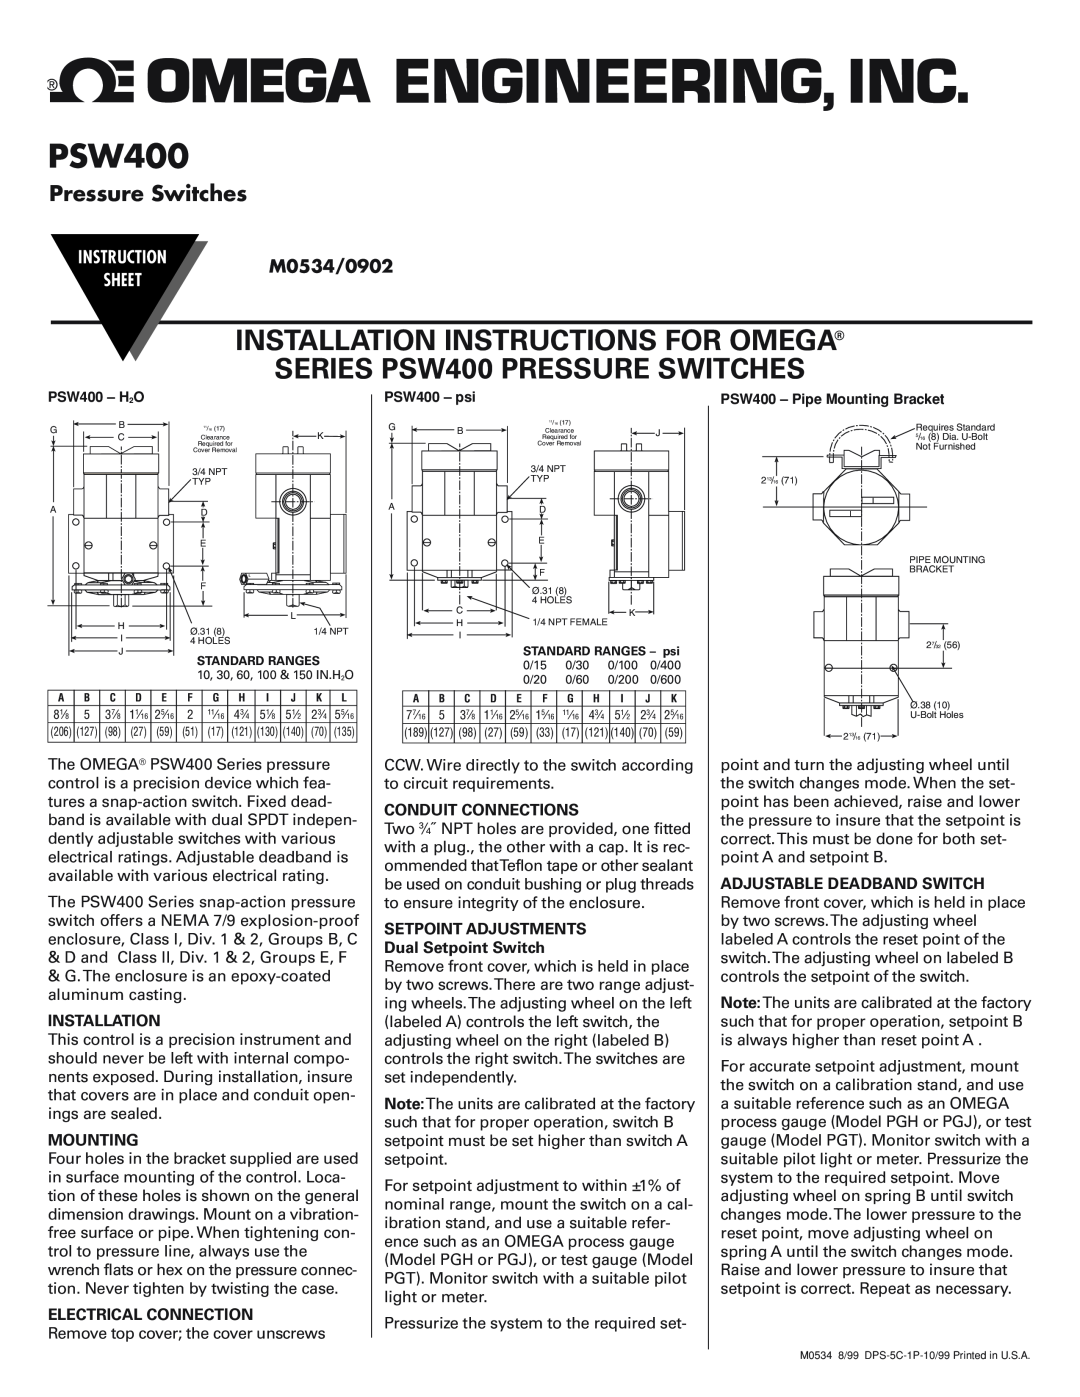 Omega Engineering instruction sheet INSTALLATION INSTRUCTIONS FOR OMEGA SERIES PSW400 PRESSURE SWITCHES, M0534/0902 